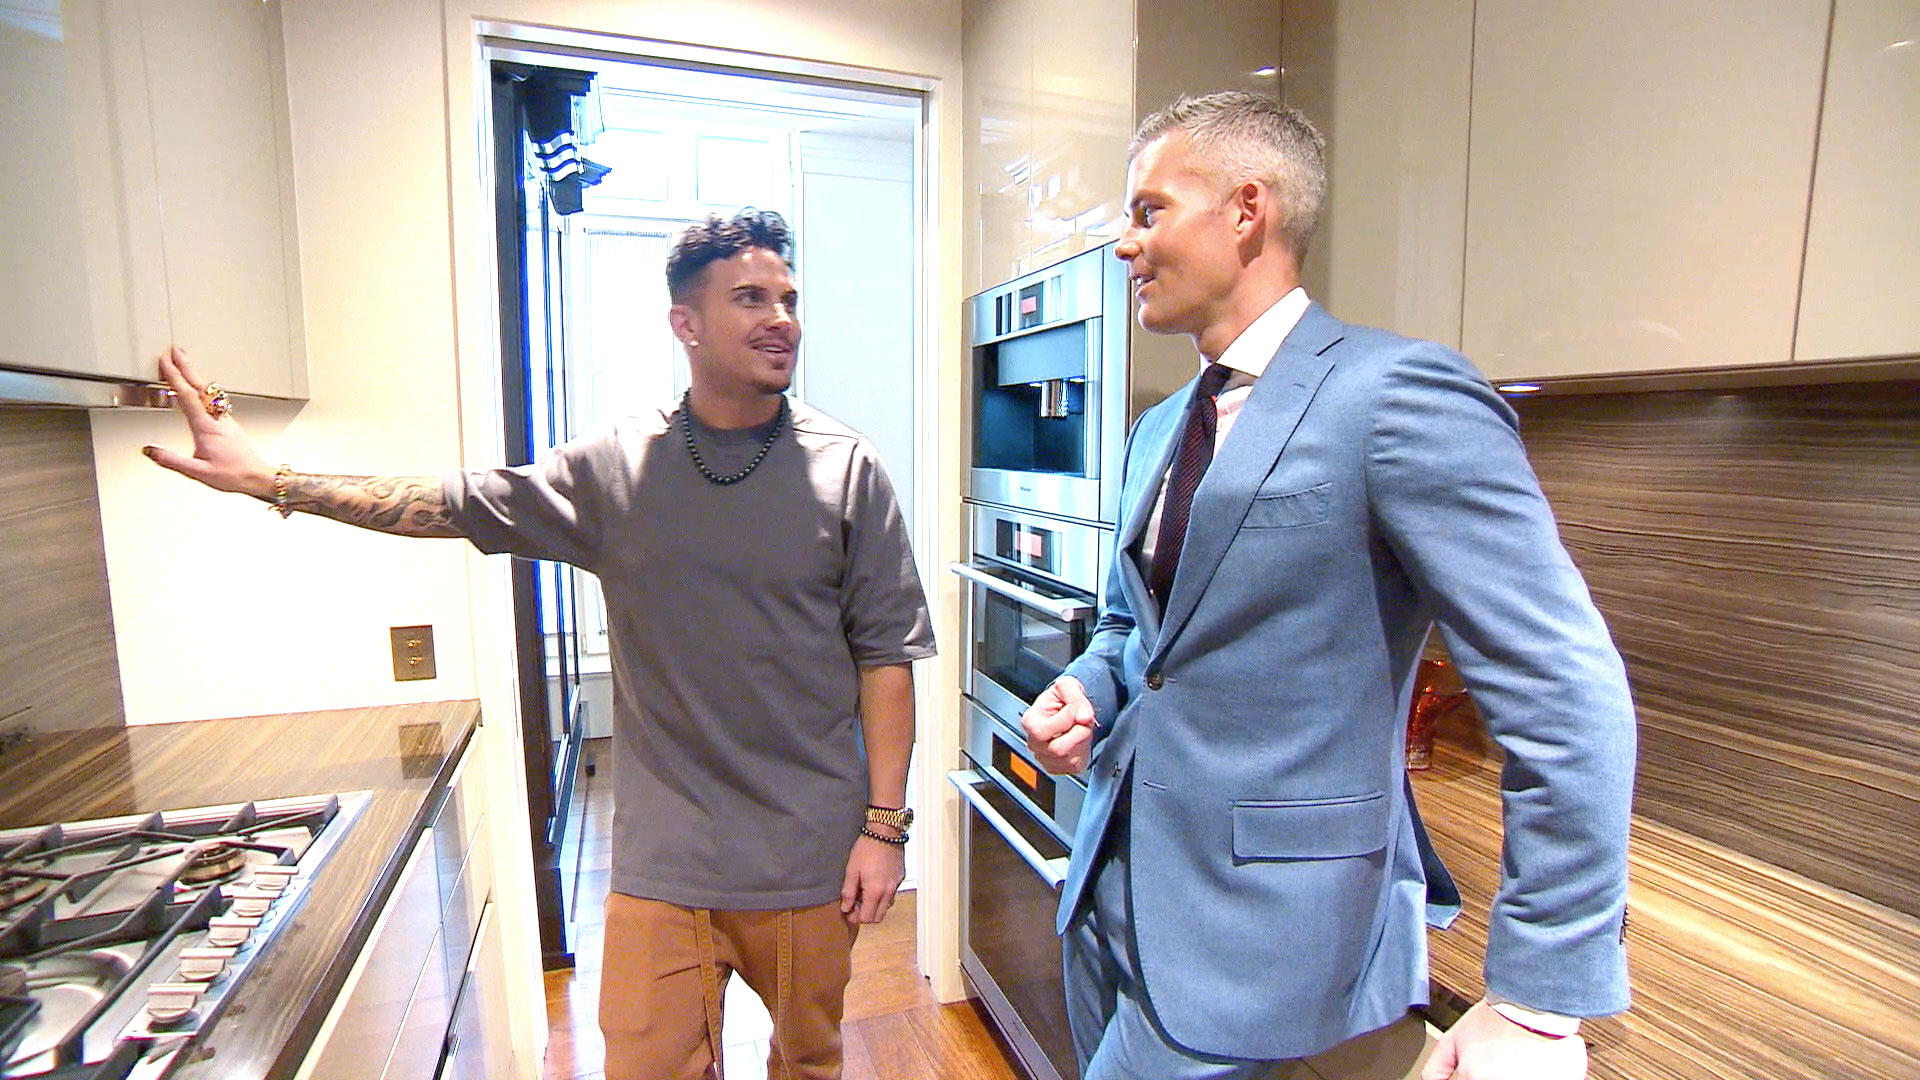 Marc Jacobs' 'Million Dollar Listing' debut features golden ceilings